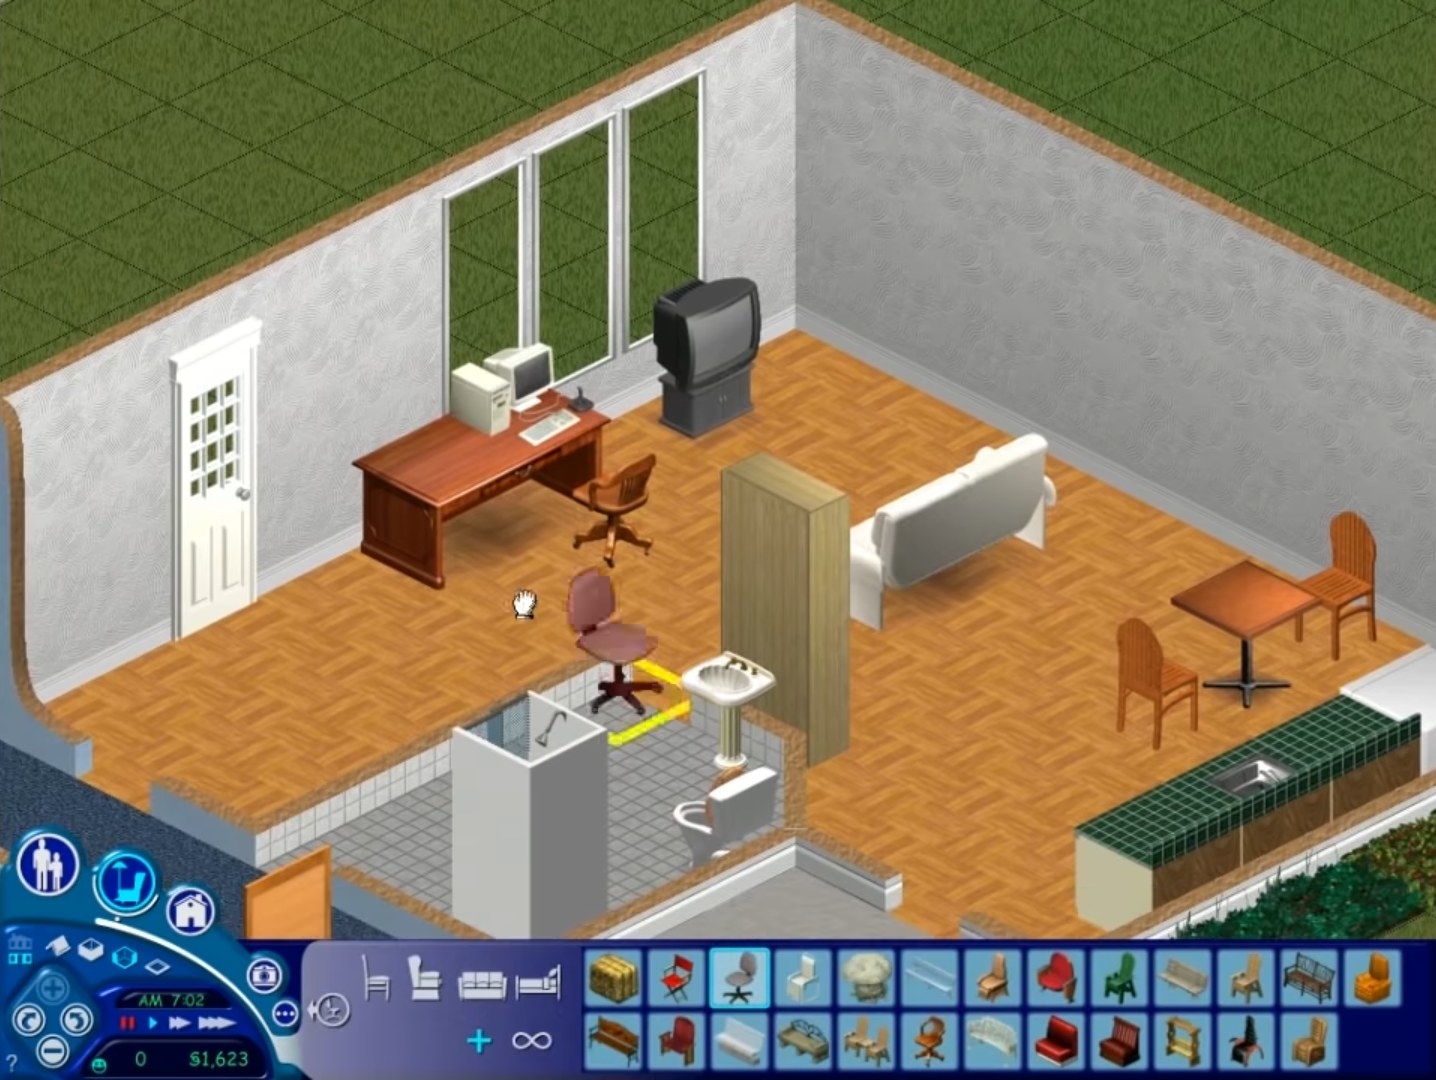 Scene from a video game